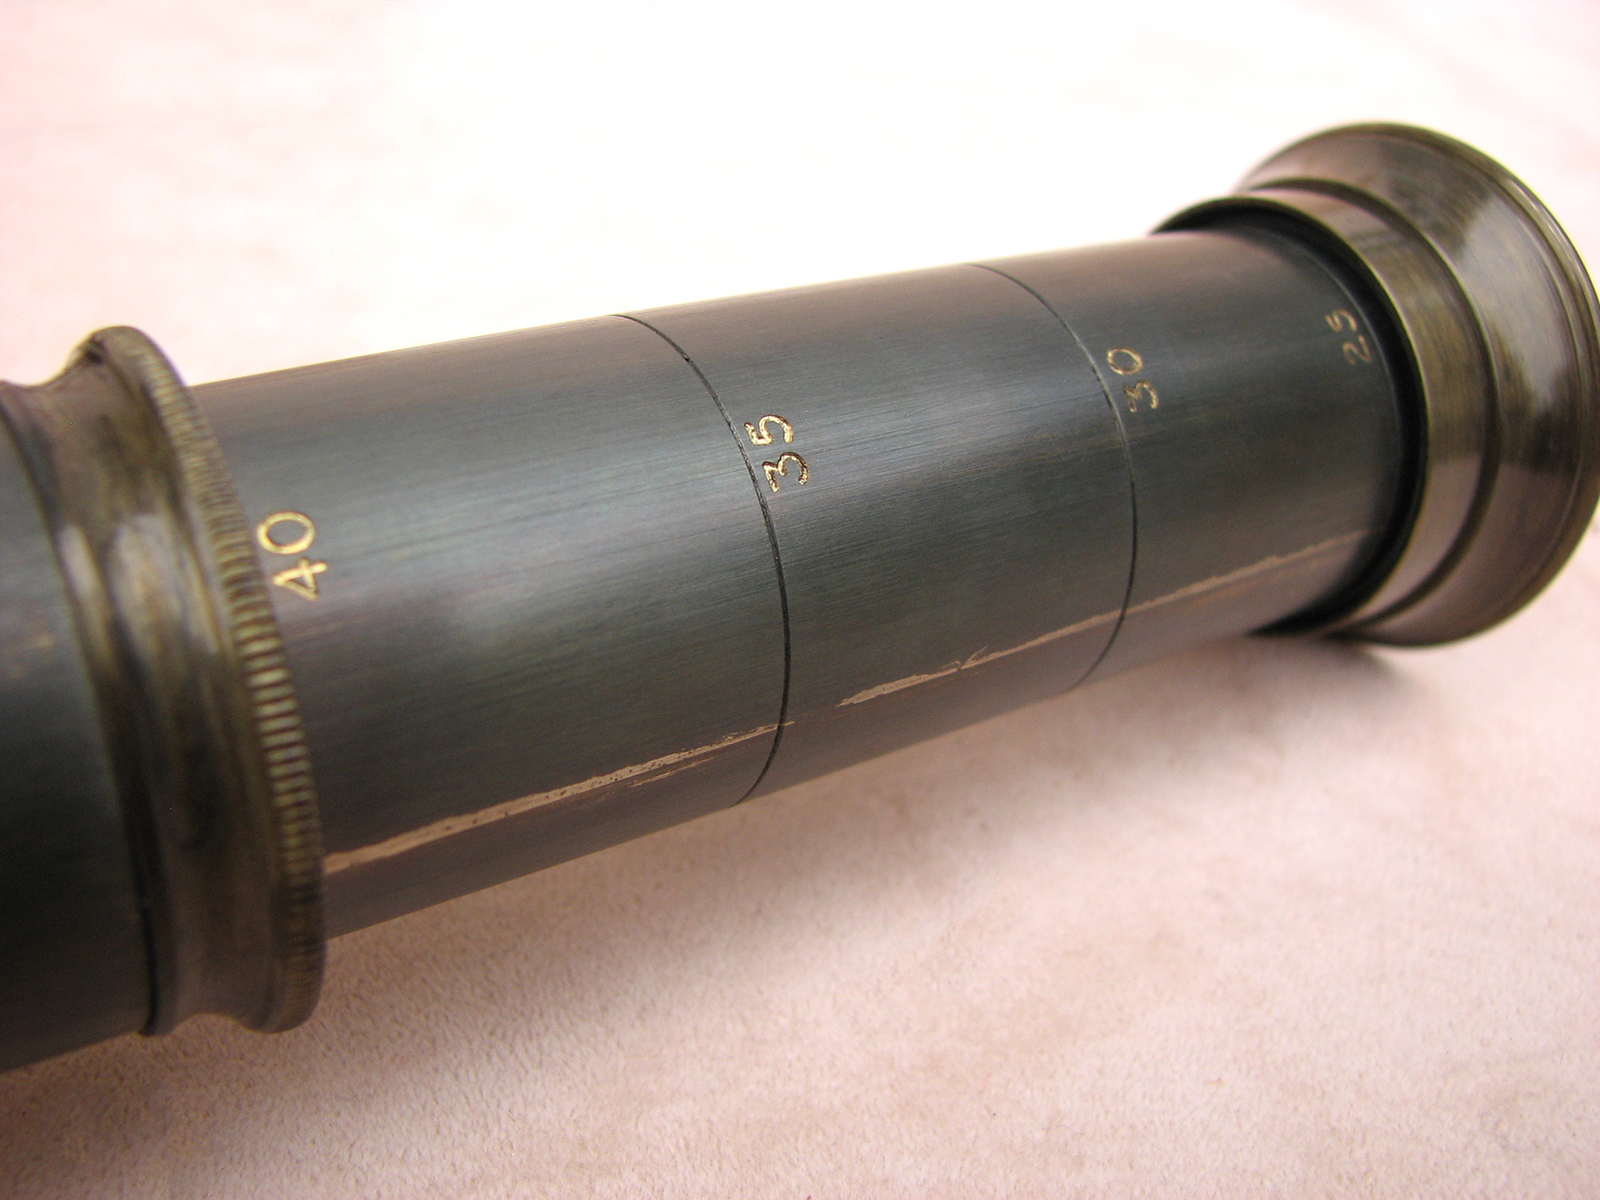 Broadhurst Clarkson 3 draw pancratic telescope up to 40x magnification, retailed by H Salanson Bristol